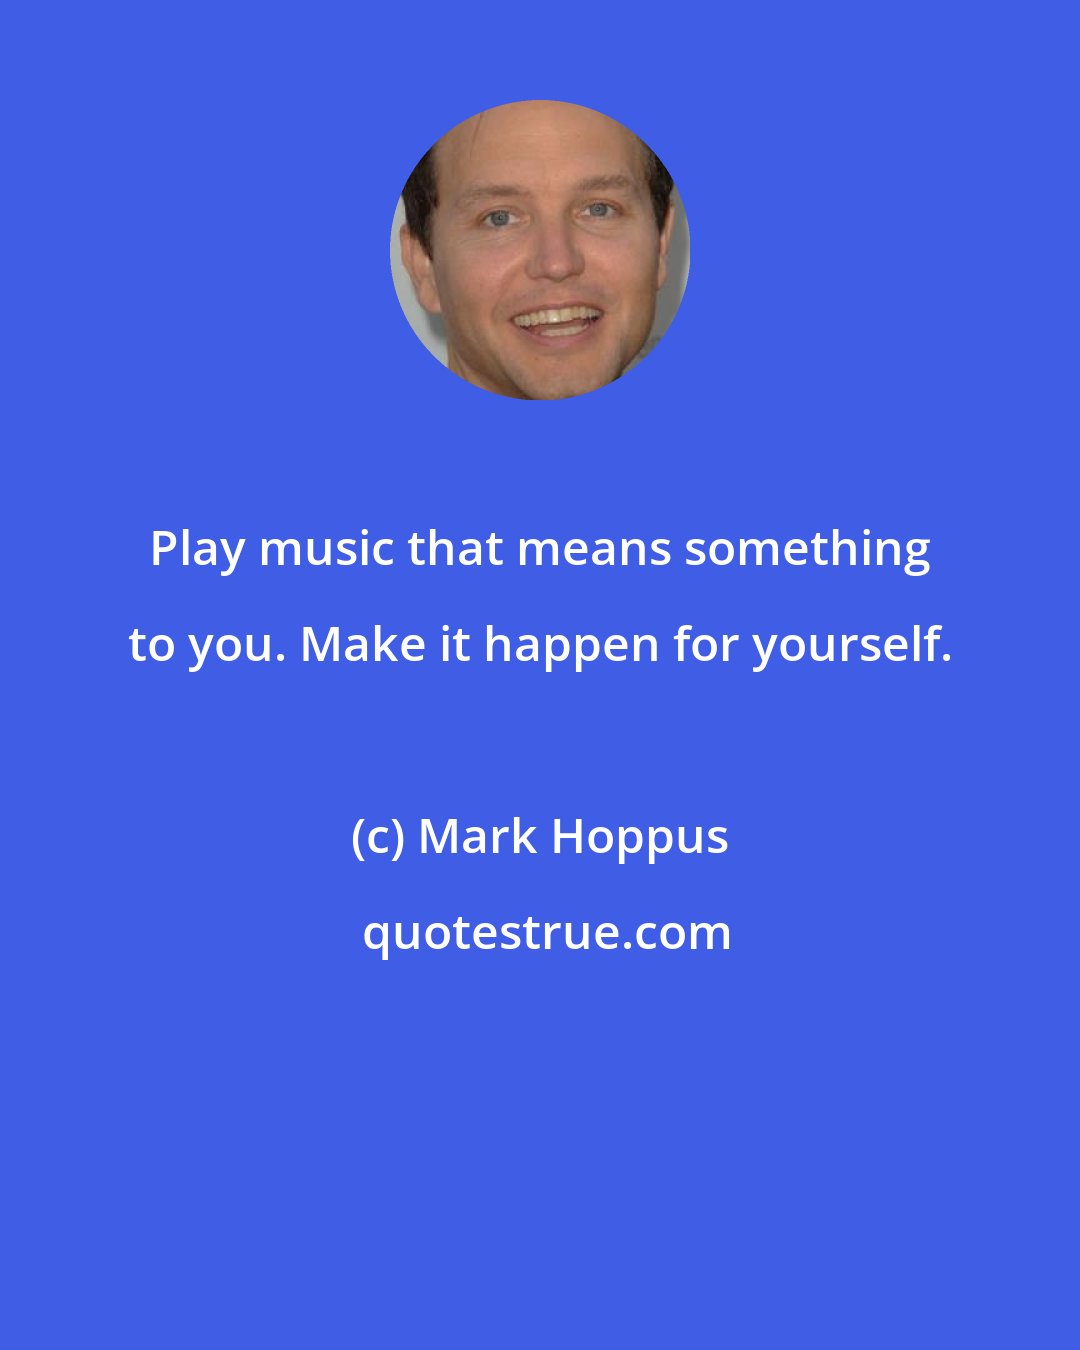 Mark Hoppus: Play music that means something to you. Make it happen for yourself.